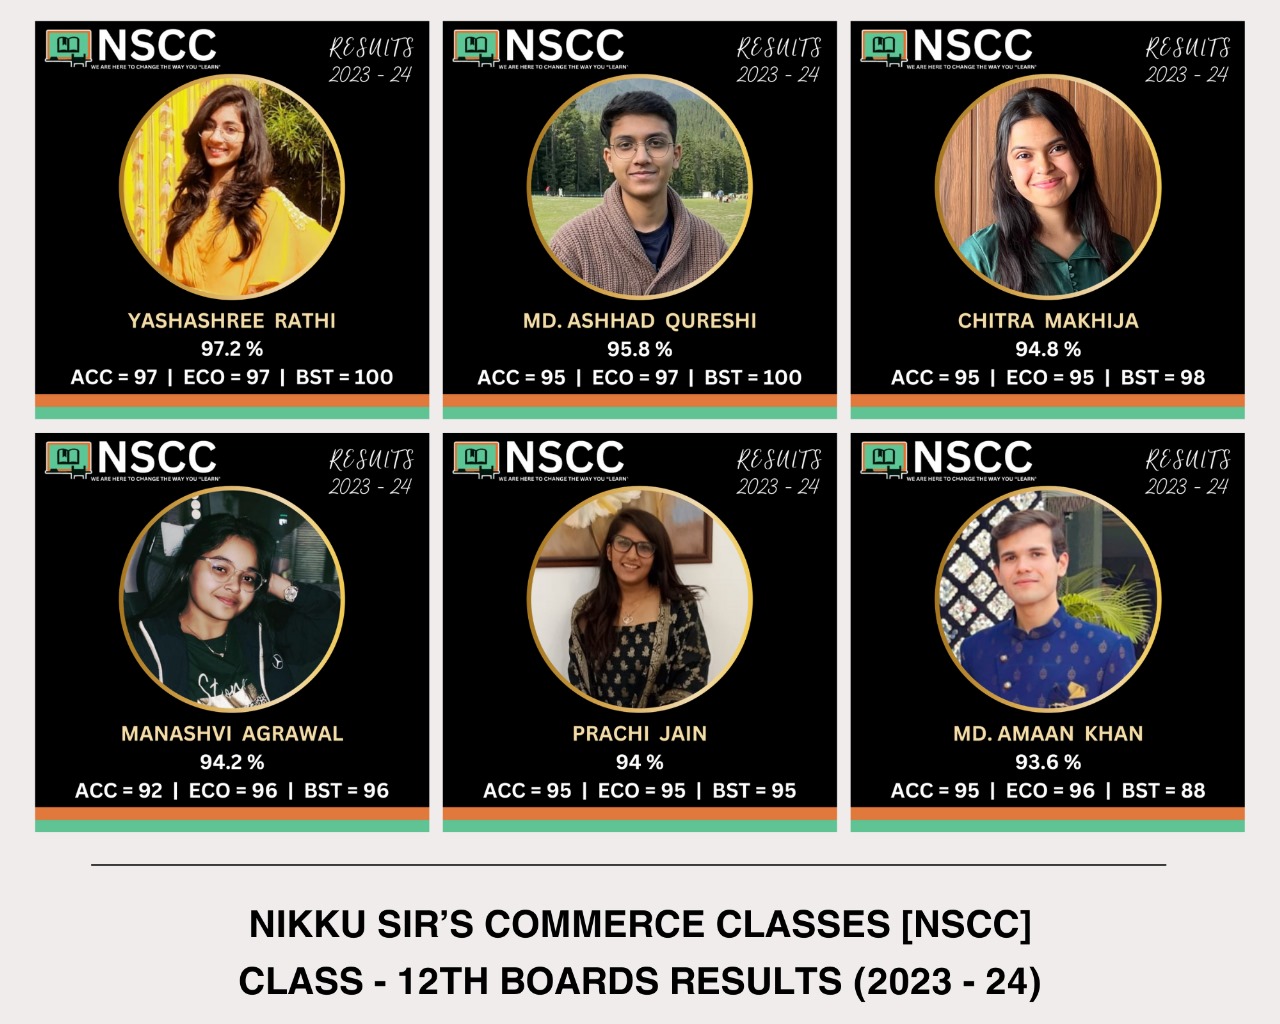 Nikku Sir's Commerce Classes NSCC has once again cemented its reputation as a premier coaching institute